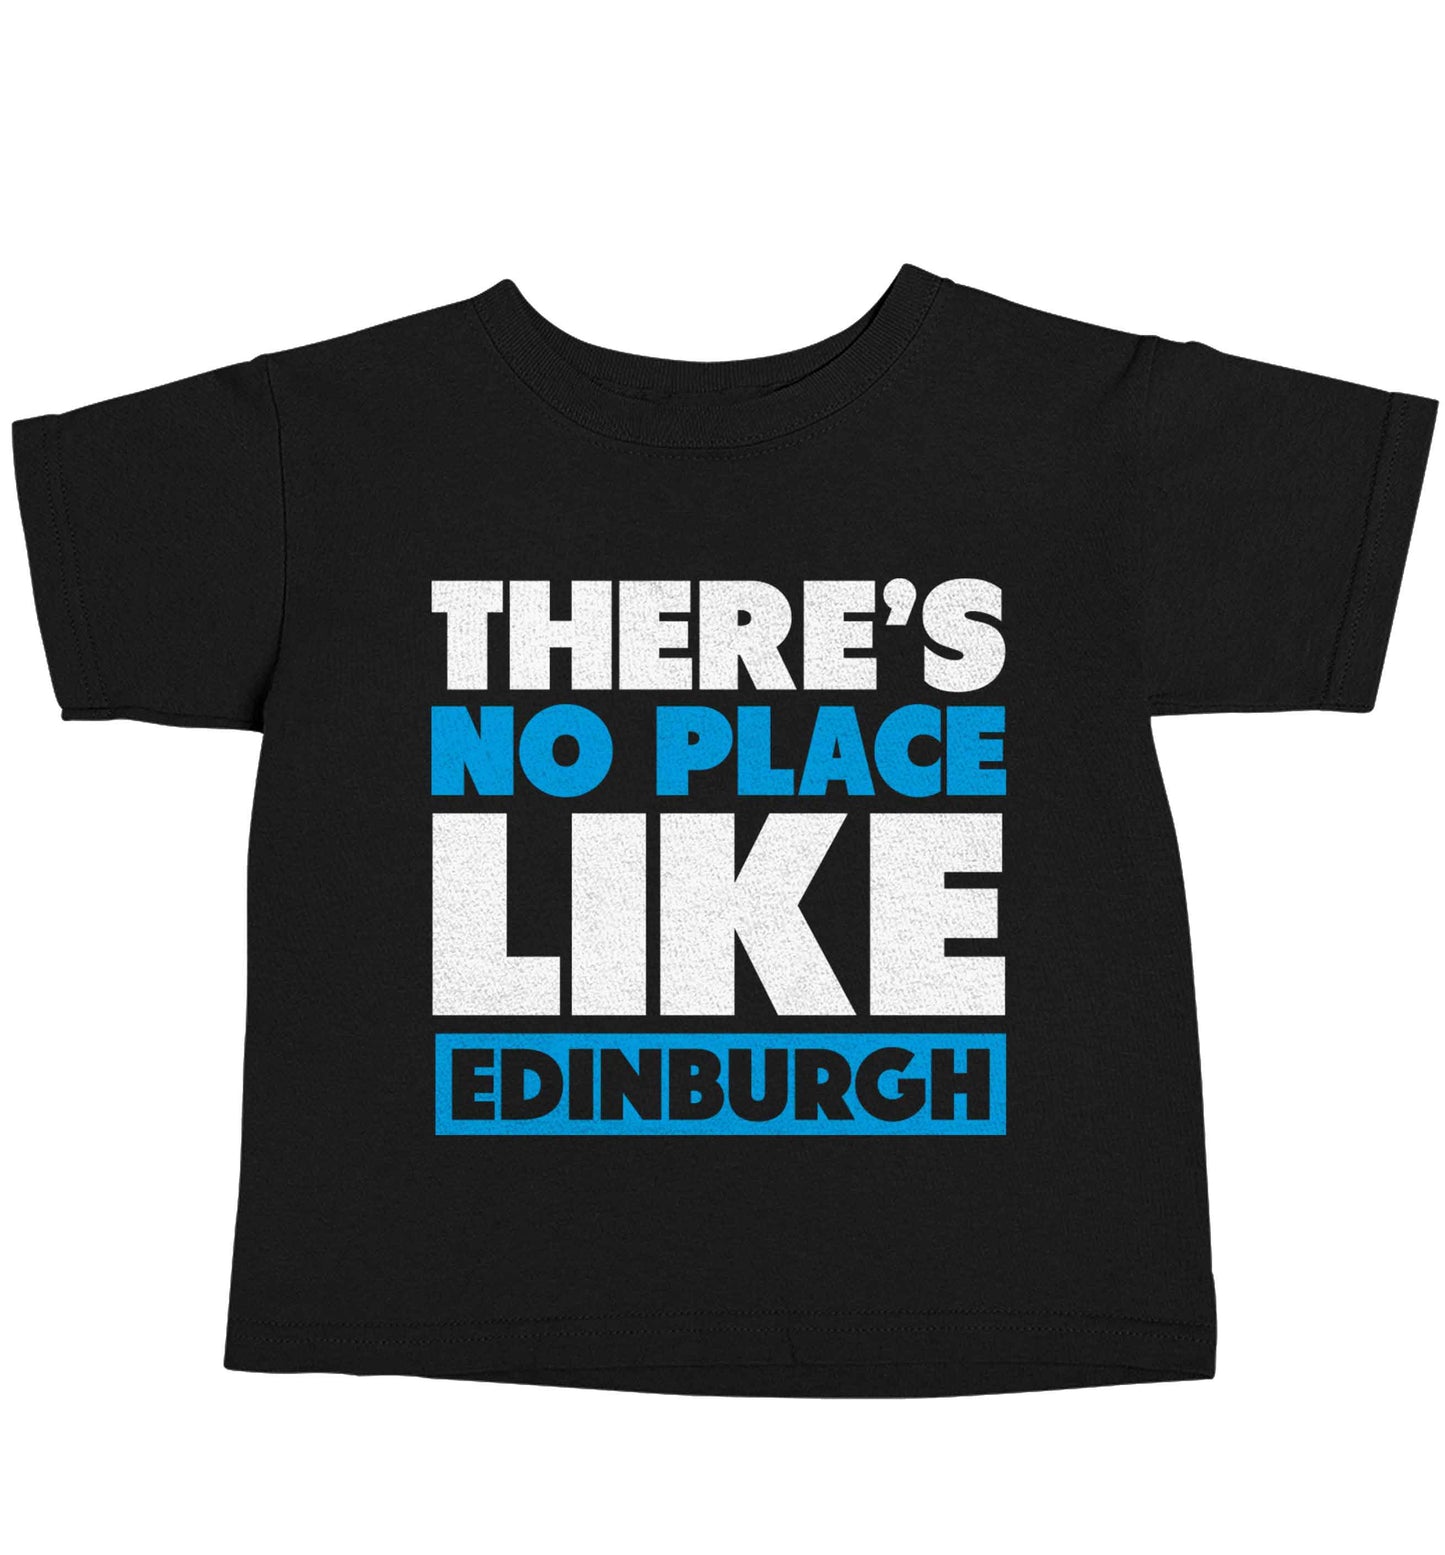 There's no place like Edinburgh Black baby toddler Tshirt 2 years